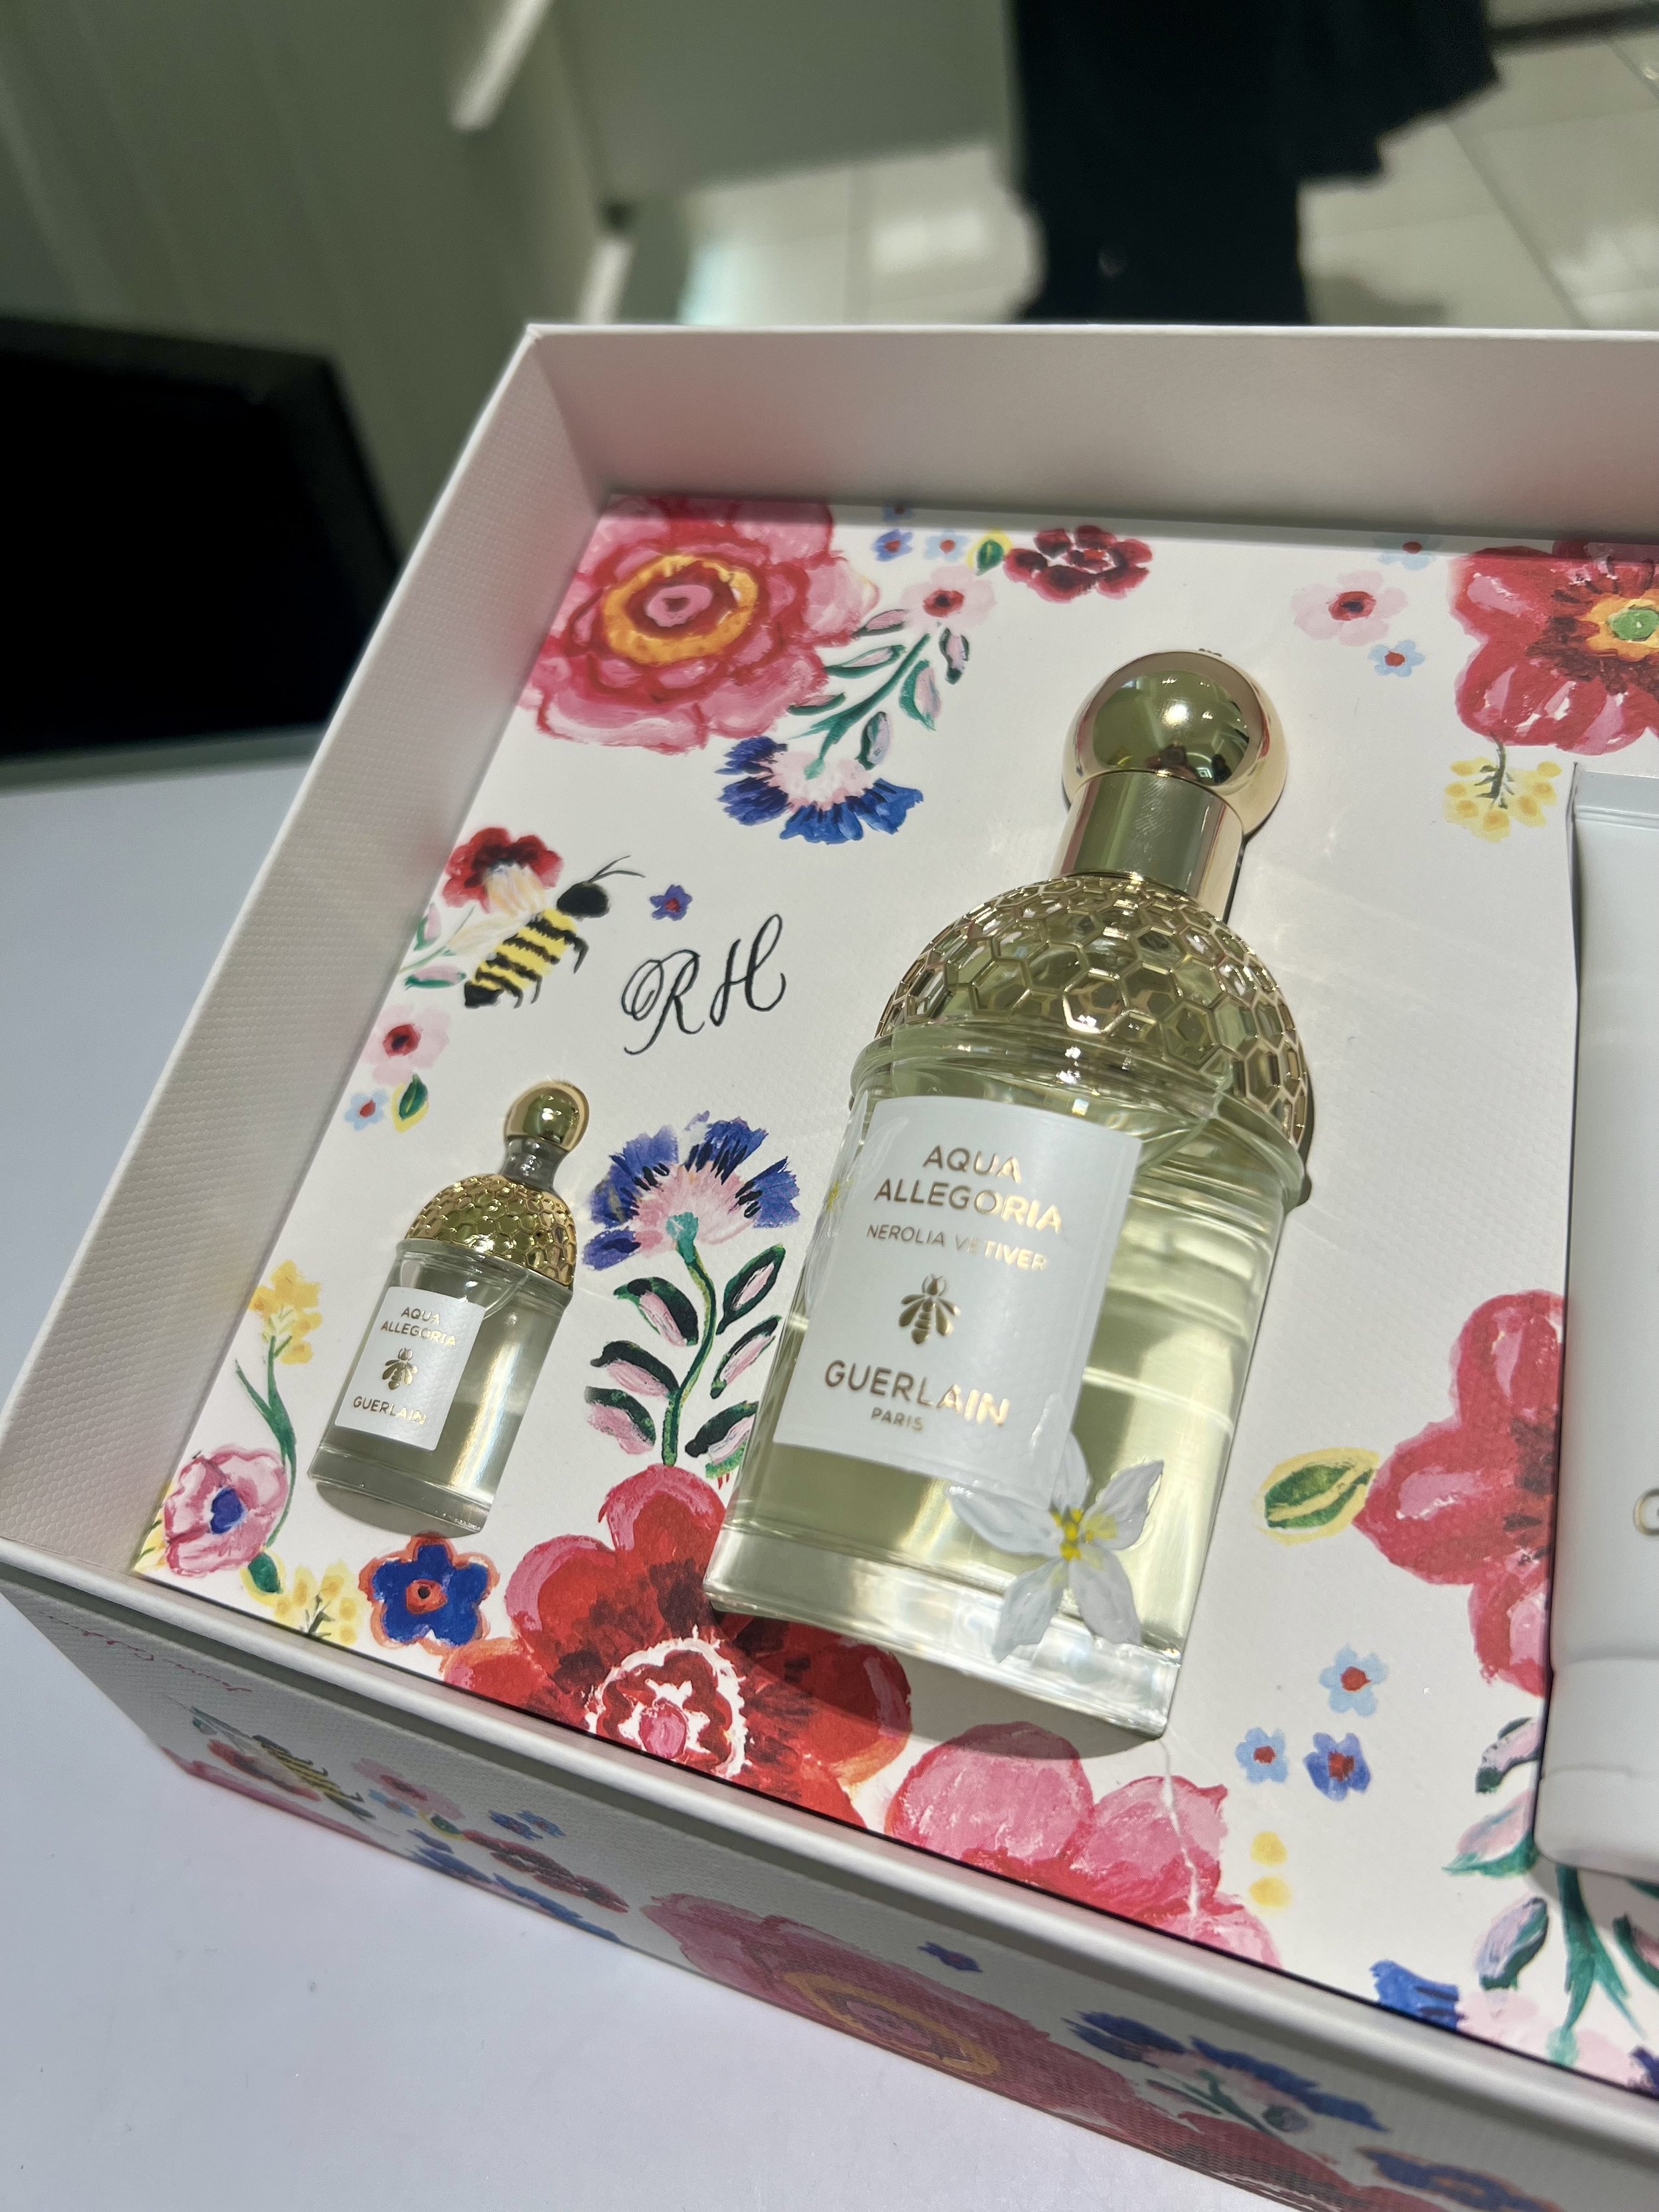 calligraphy-on-guerlain-packaging-with-painted-bottle.jpeg